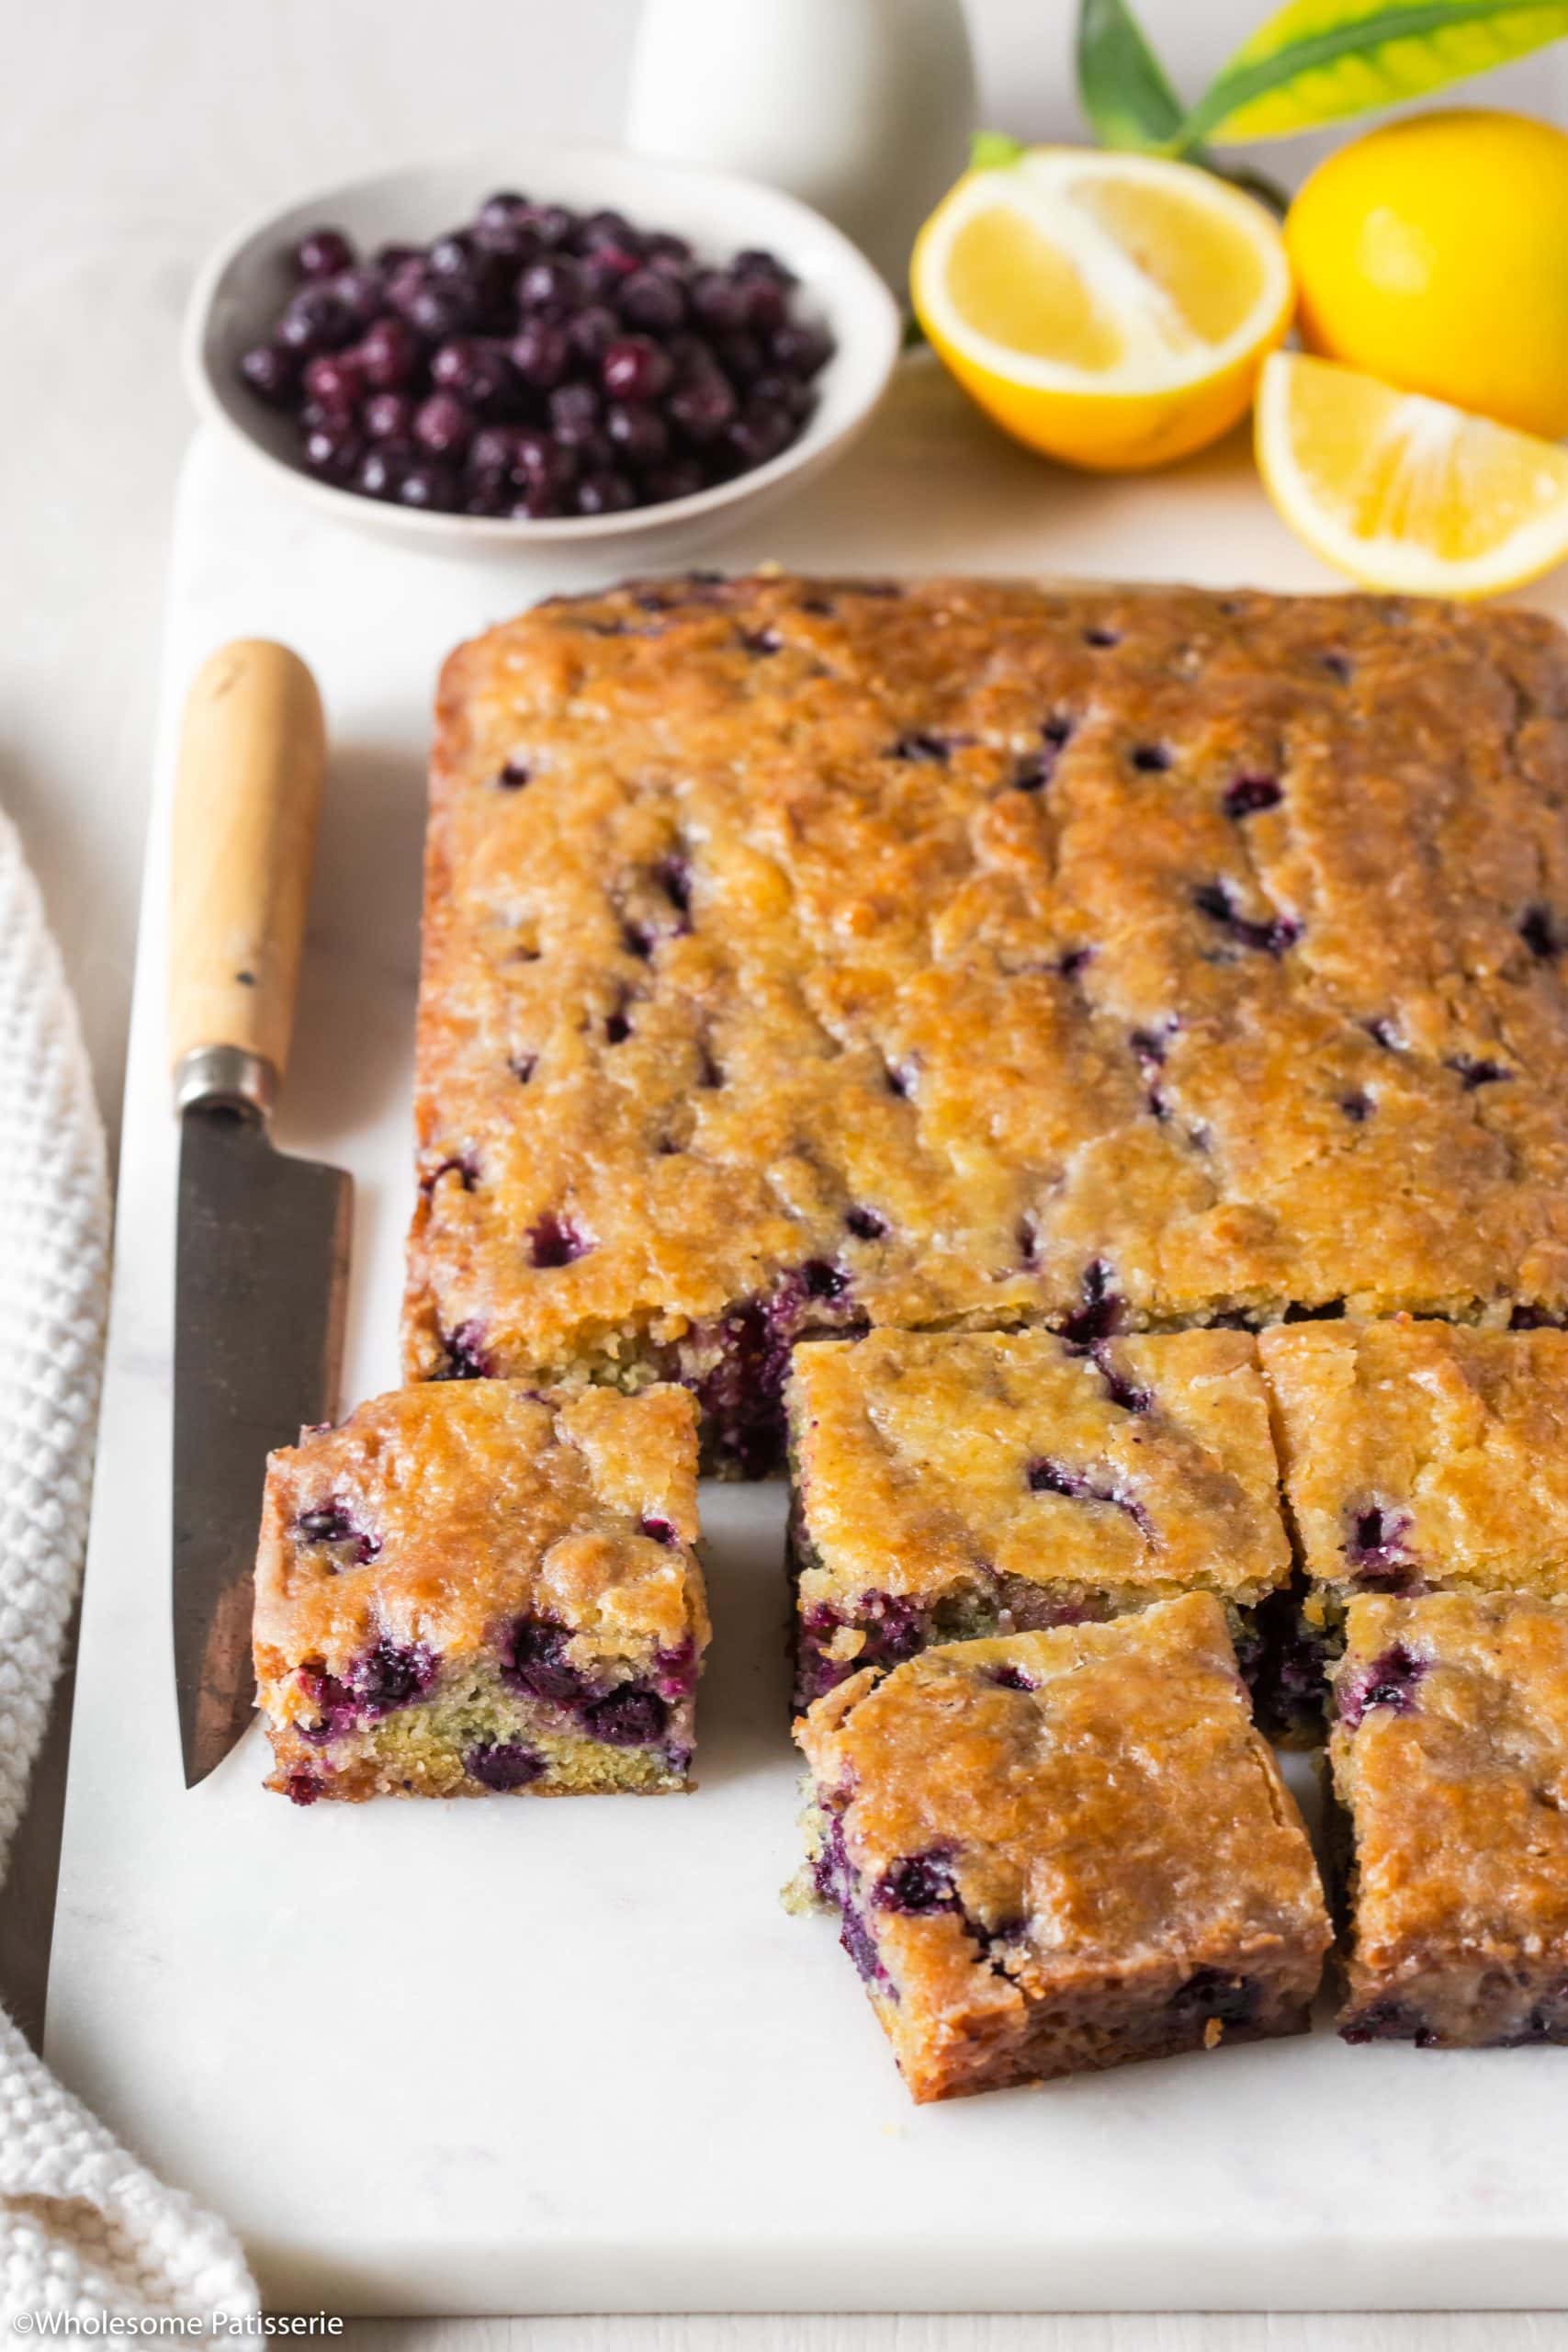 Blueberry cake sliced into squares sitting on white platter next to brown handle knife with whole fresh lemons and blueberries behind.